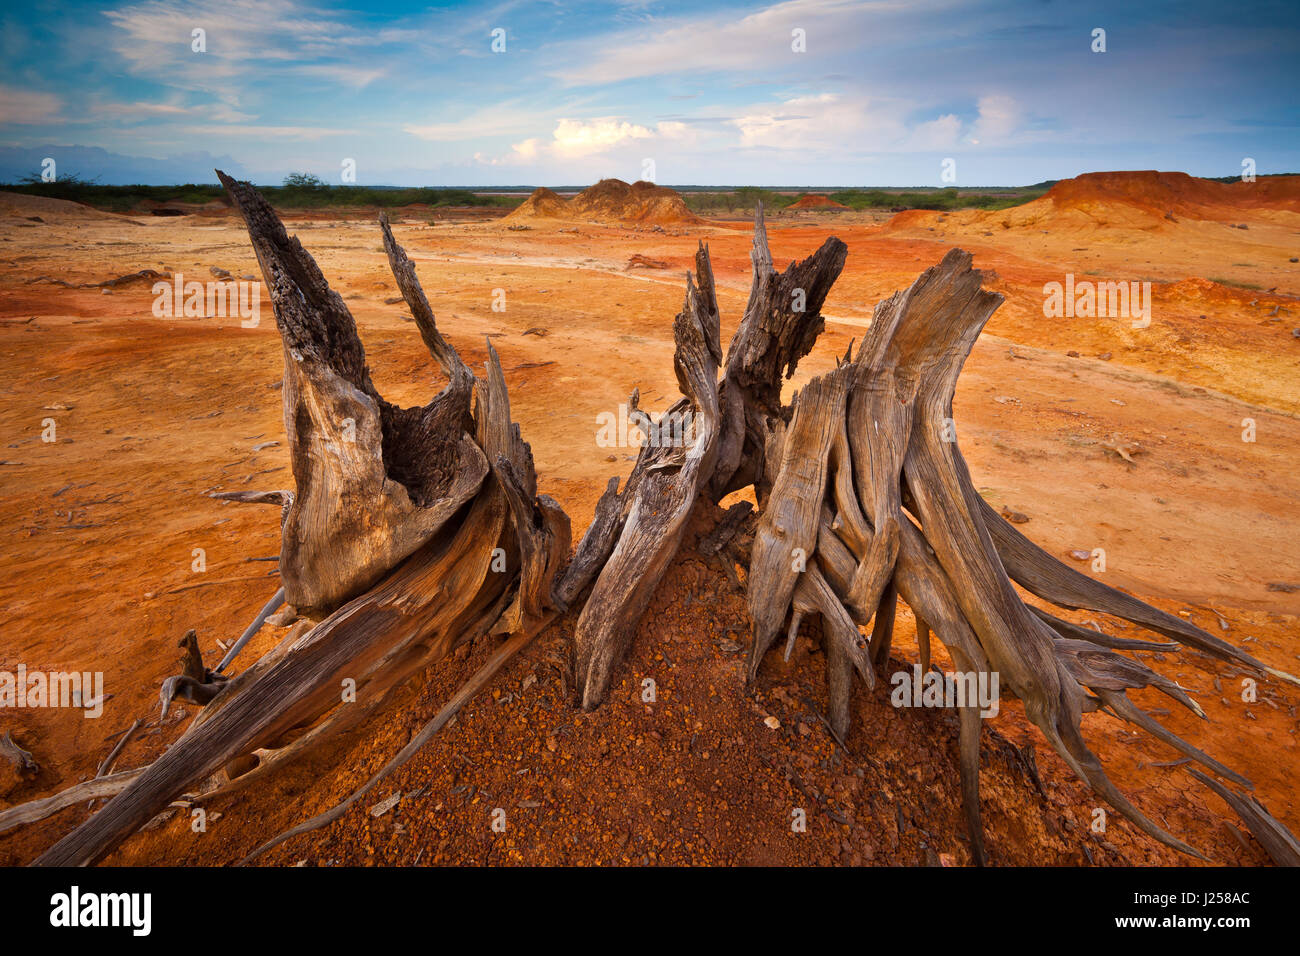 Panama landscape with dry root in the desert of Sarigua National Park, Herrera province, Republic of Panama, Central America. Stock Photo